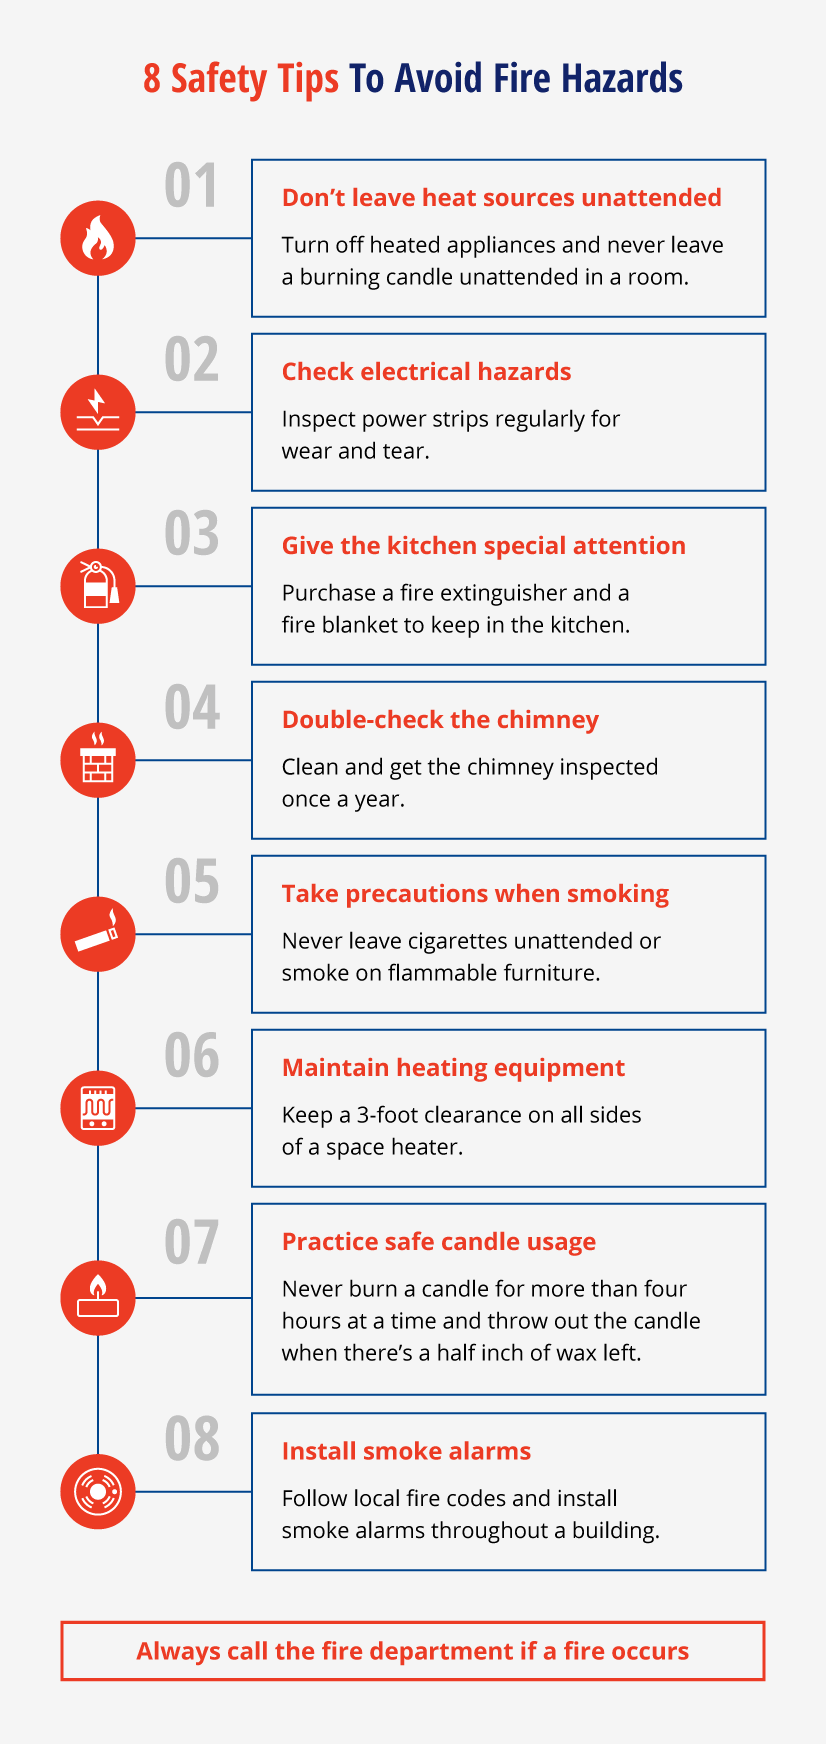 Image recaps 8 safety tips to avoid fires.